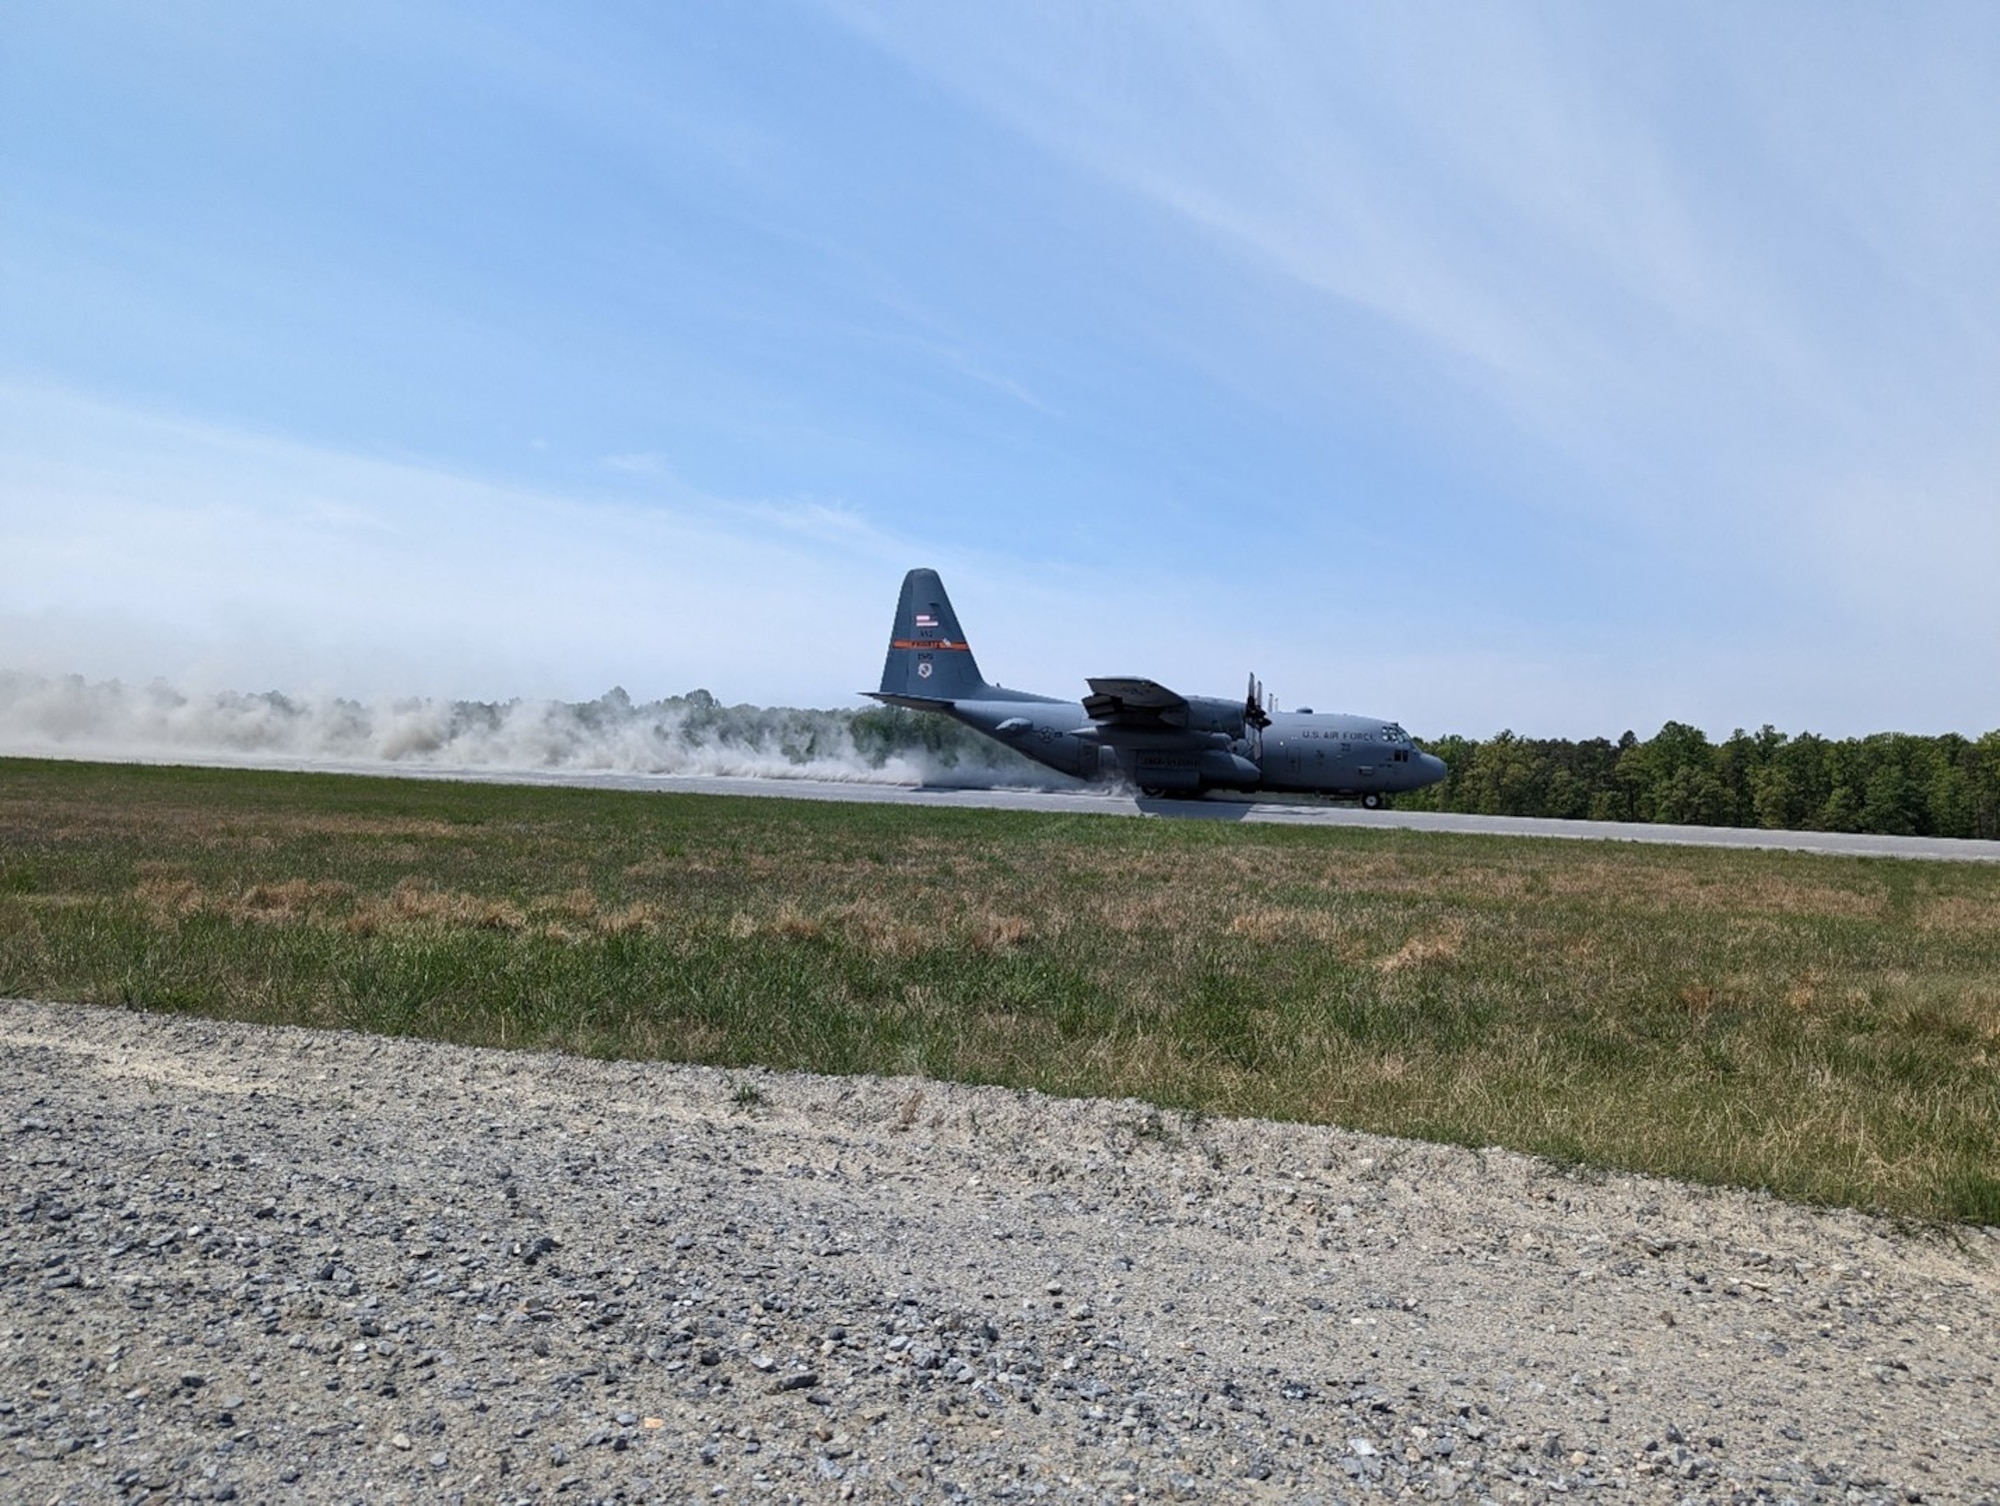 An Illinois Air National Guard C-130 Hercules aircraft performs an assault landing at Fort A.P. Hill in Bowling Green, Virginia, April 25, 2023. (U.S. Air Force photo by Capt. Glenn Grecia)